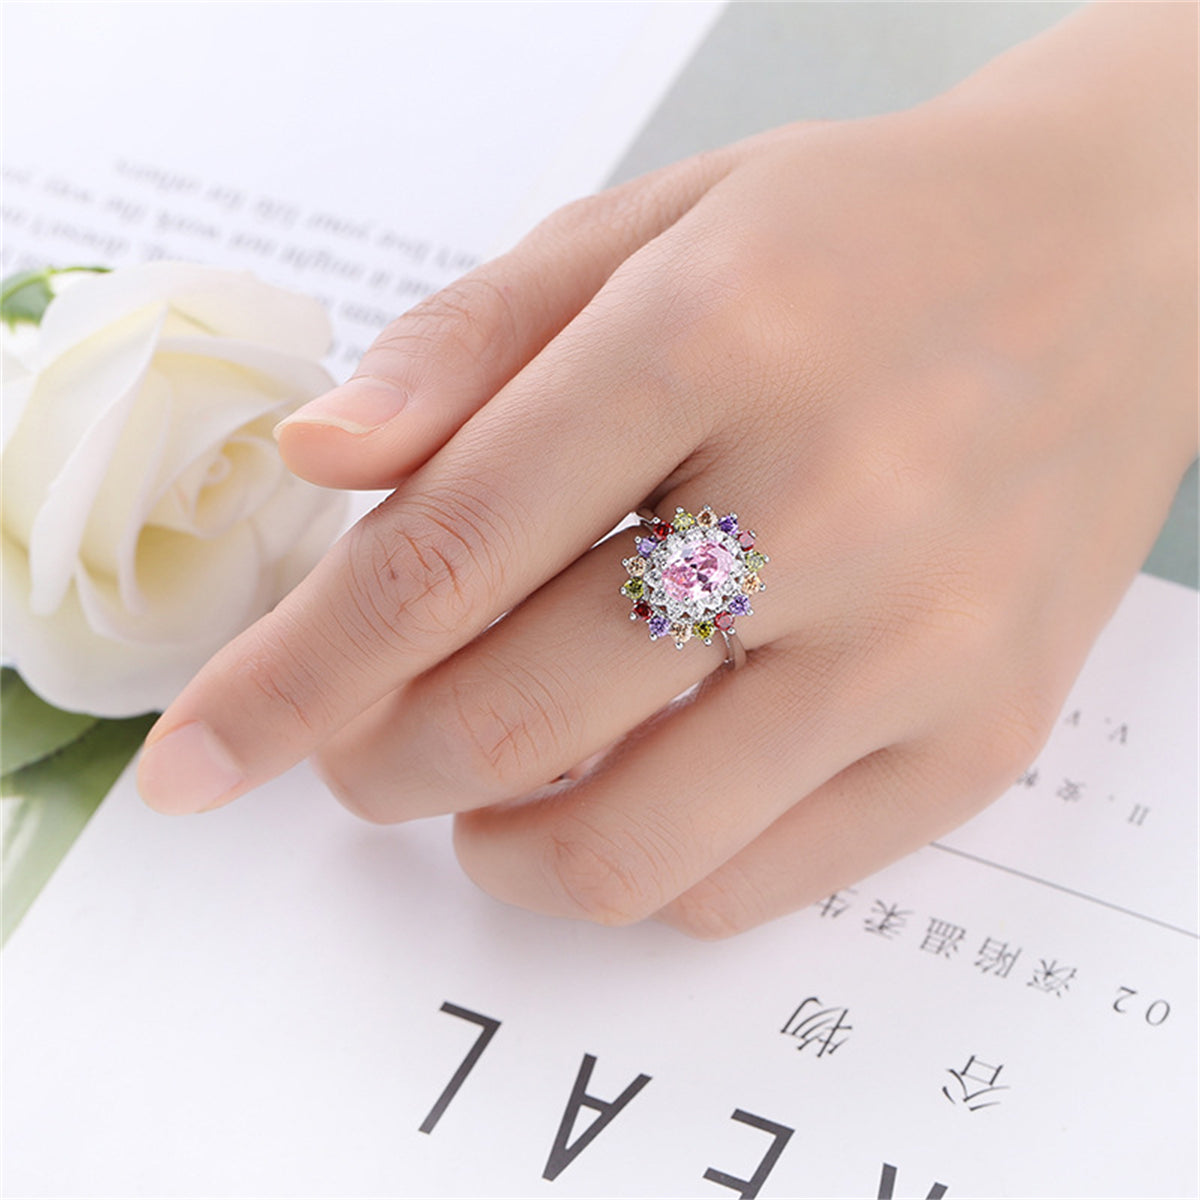 Pink Crystal & Cubic Zirconia Silver-Plated Oval-Cut Ring